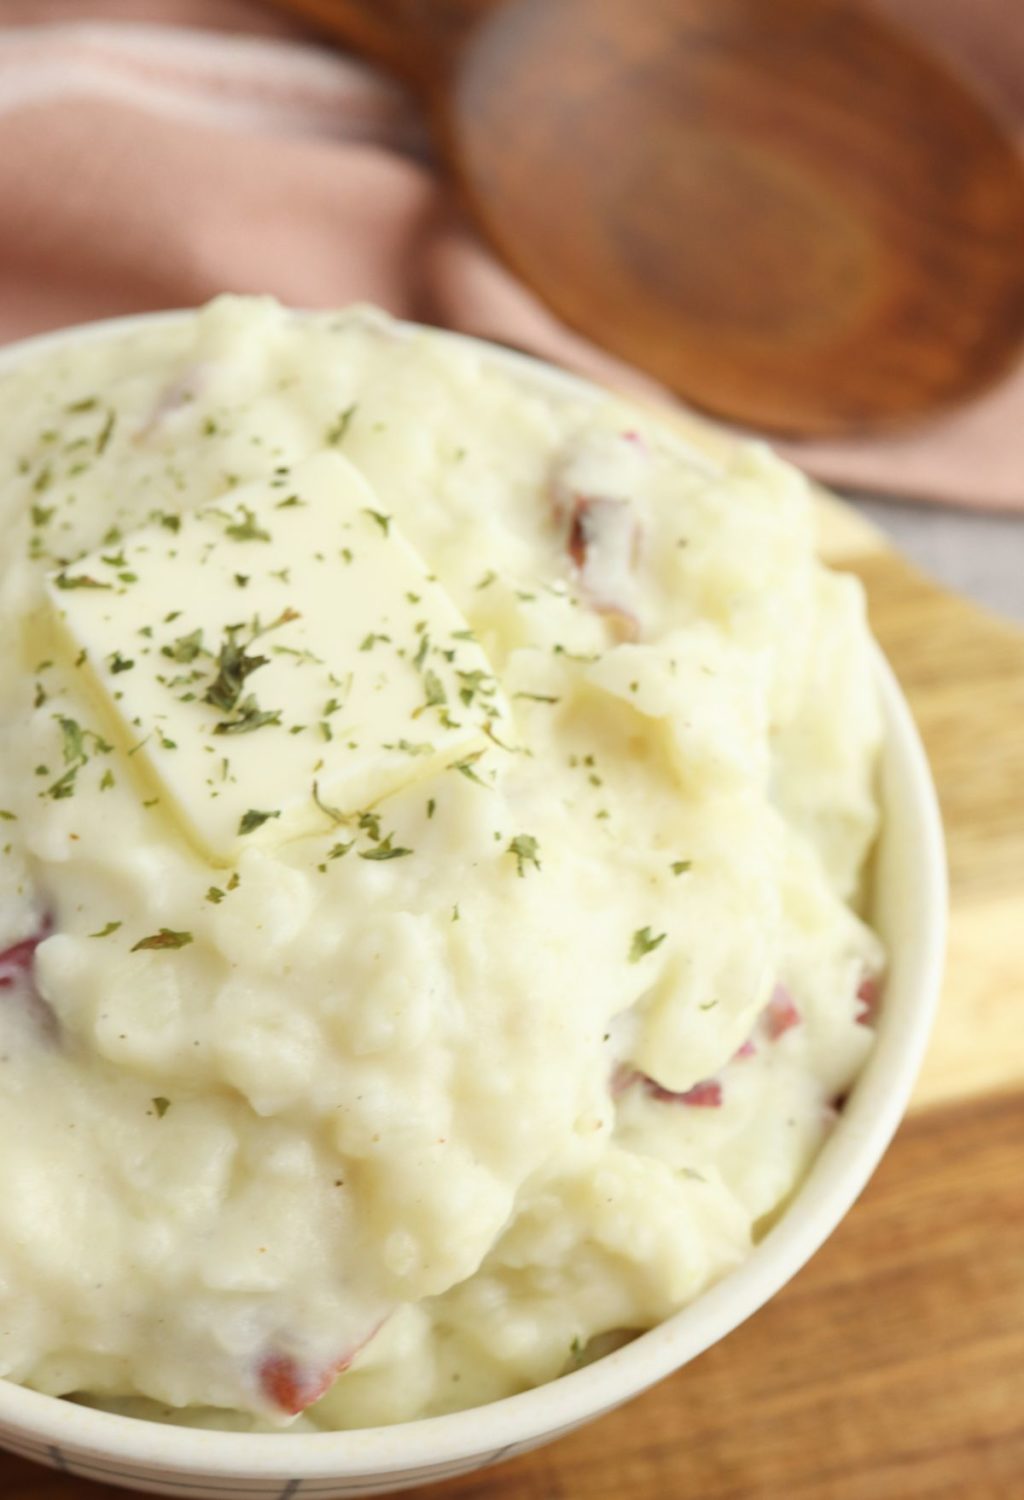 A bowl of mashed potatoes on a wooden cutting board.